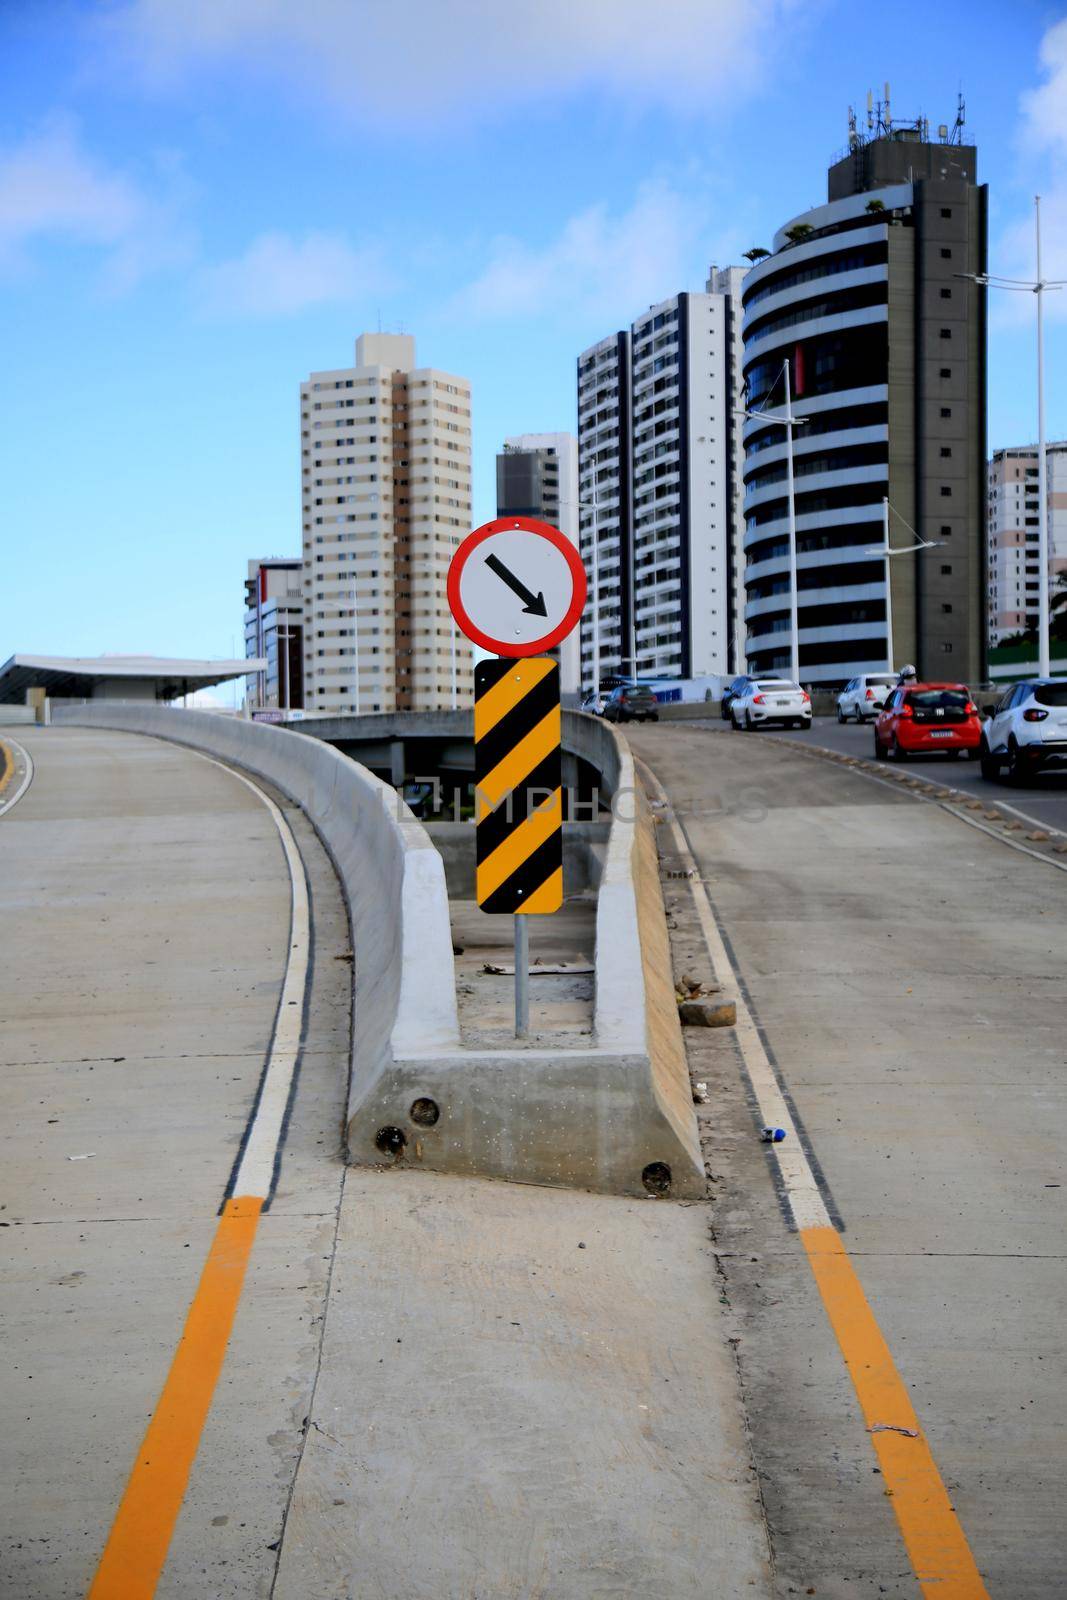 salvador, bahia, brazil - july 20, 2021: Traffic sign indicates mandatory crossing and zebra stripe indicates obstacle and danger marker on a traffic lane in the city of Salvador.